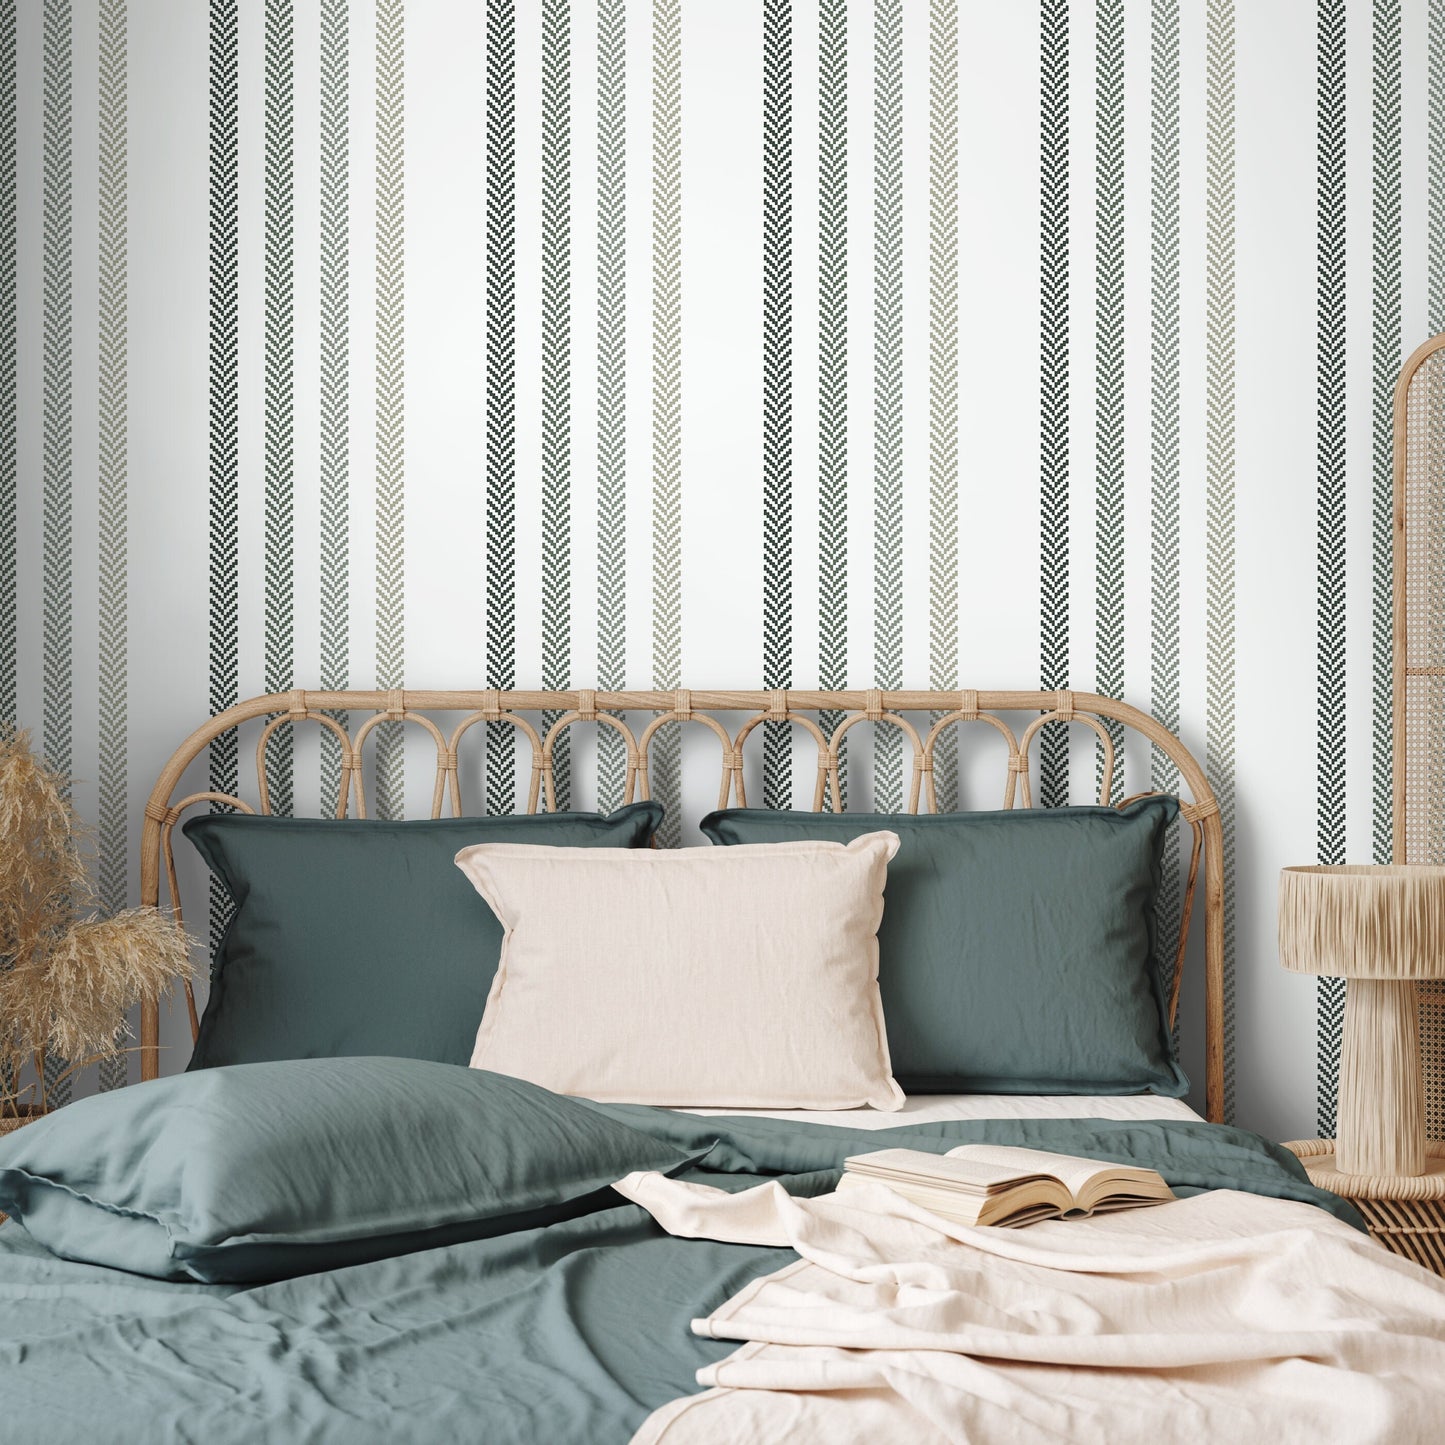 Herringbone Striped Wallpaper Farmhouse Wallpaper Peel and Stick and Traditional Wallpaper - D780